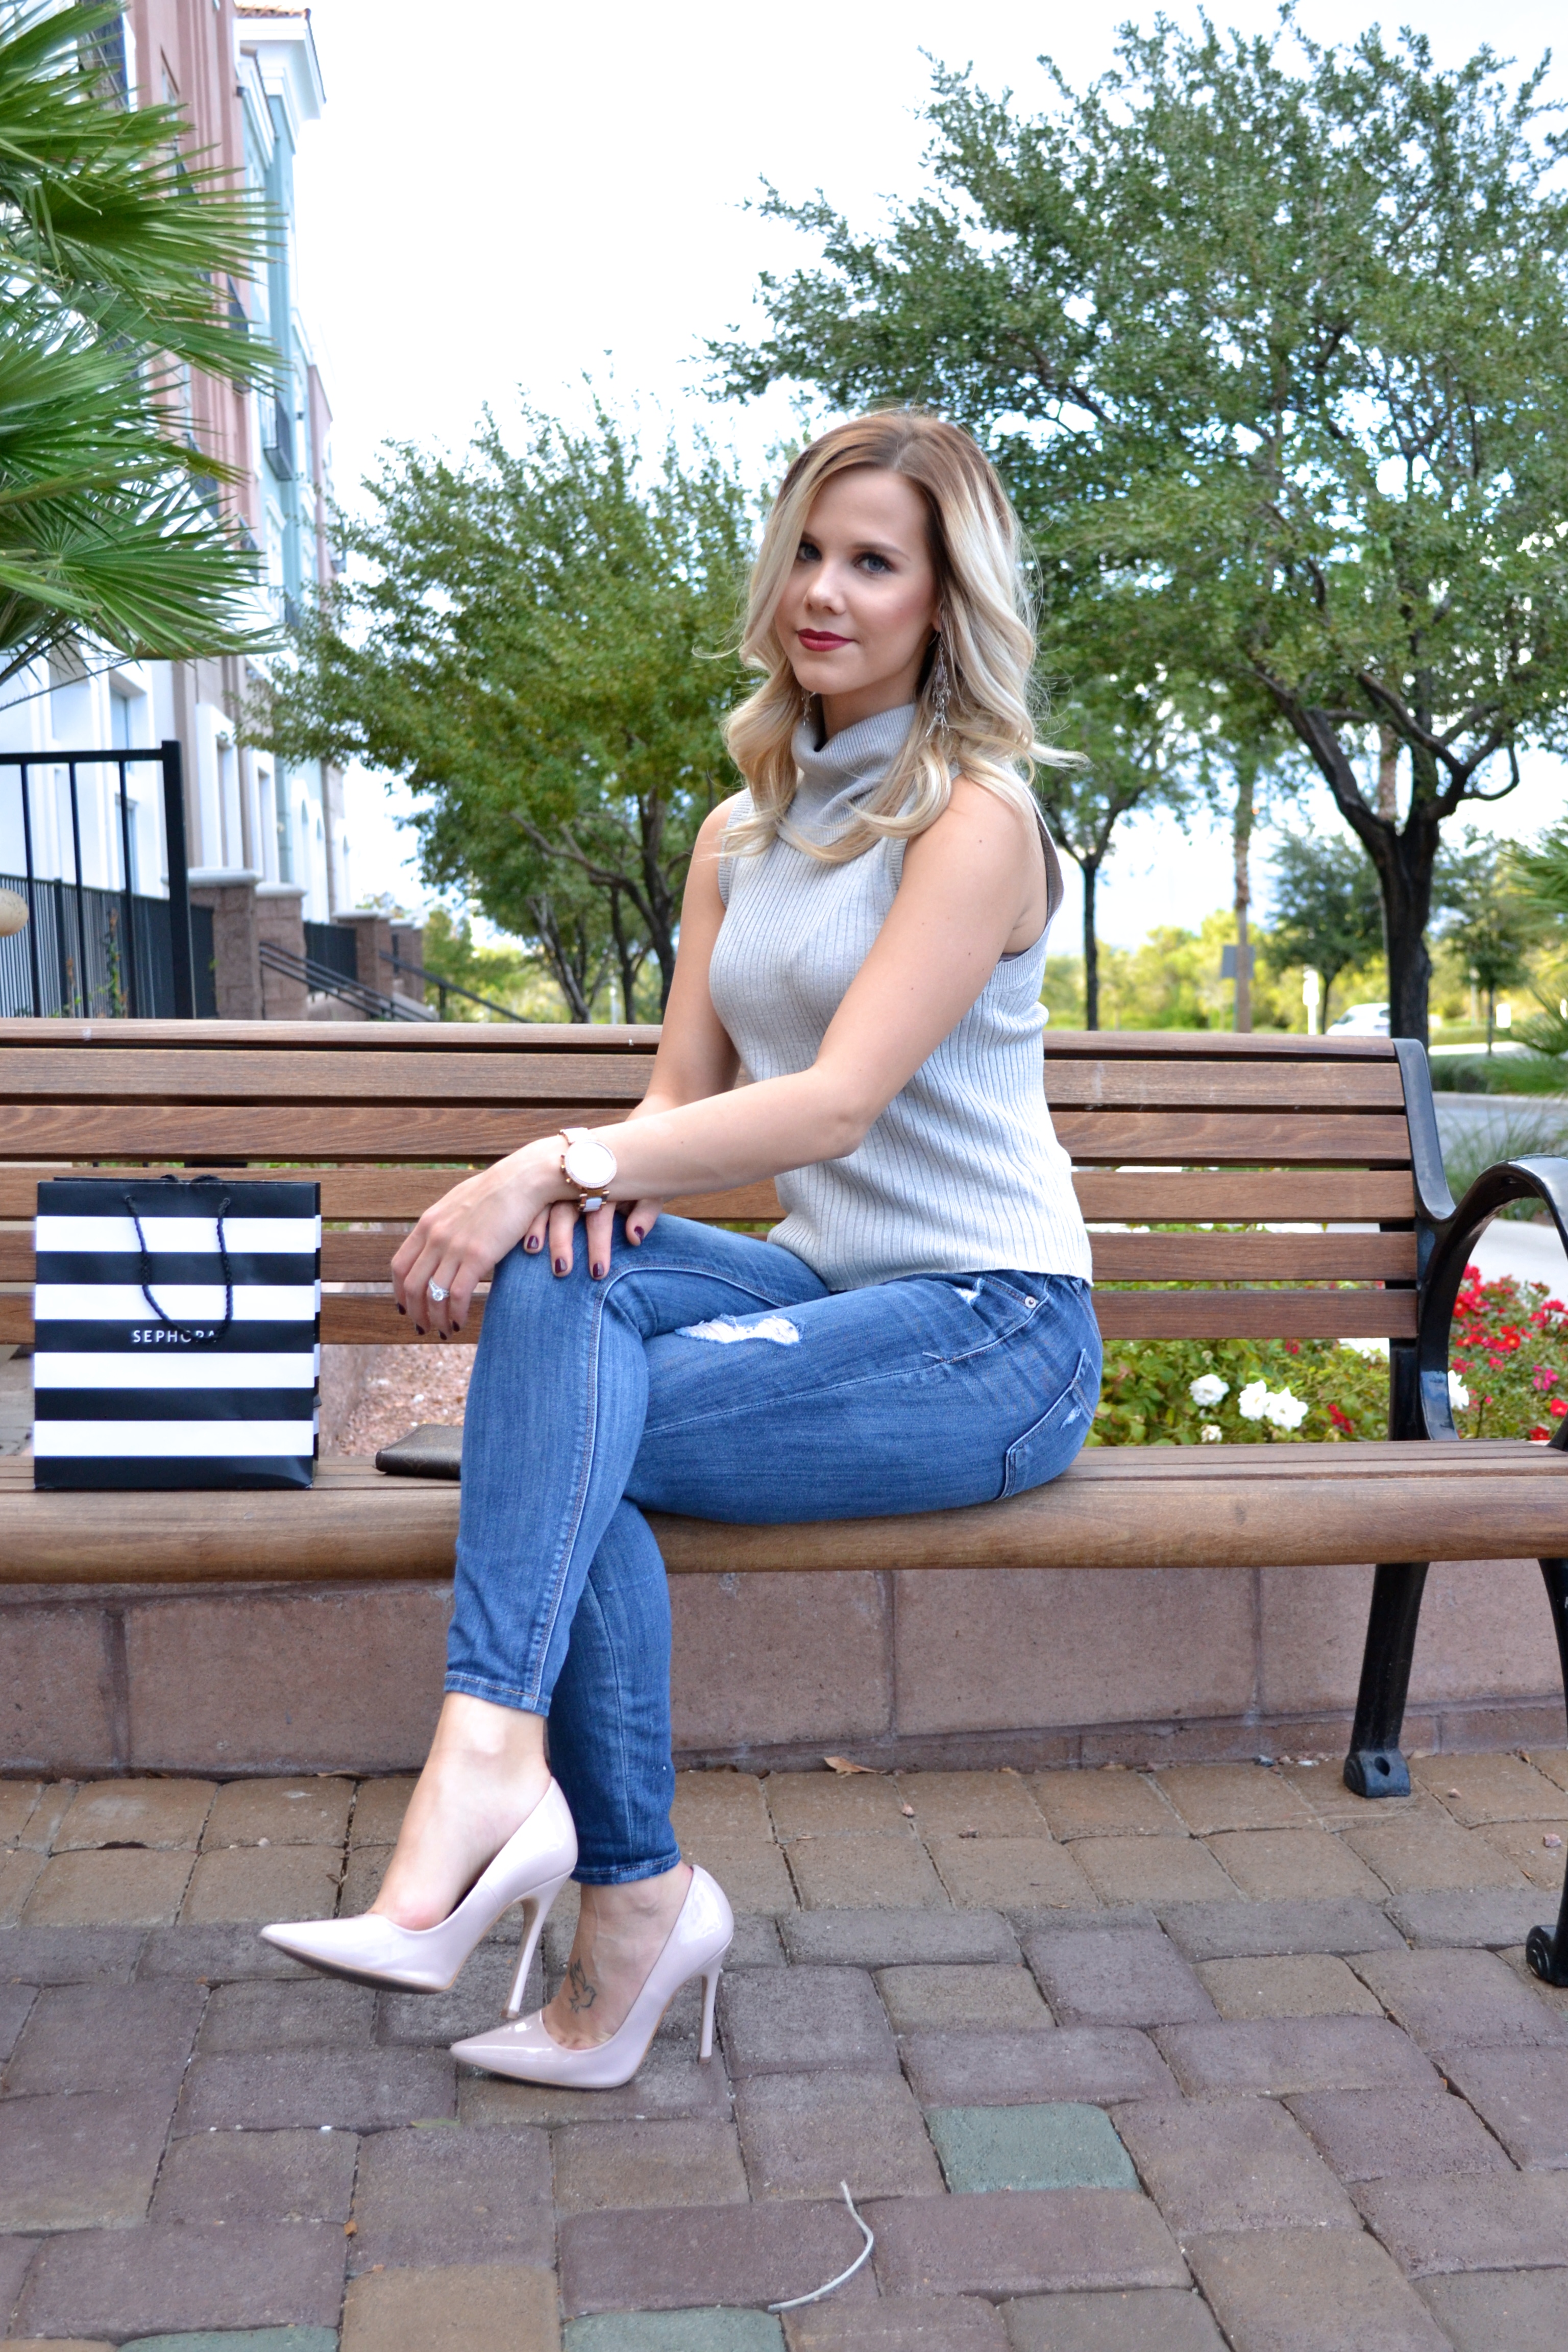 Sleeveless Sweater and ripped jeans in nude pointed pumps